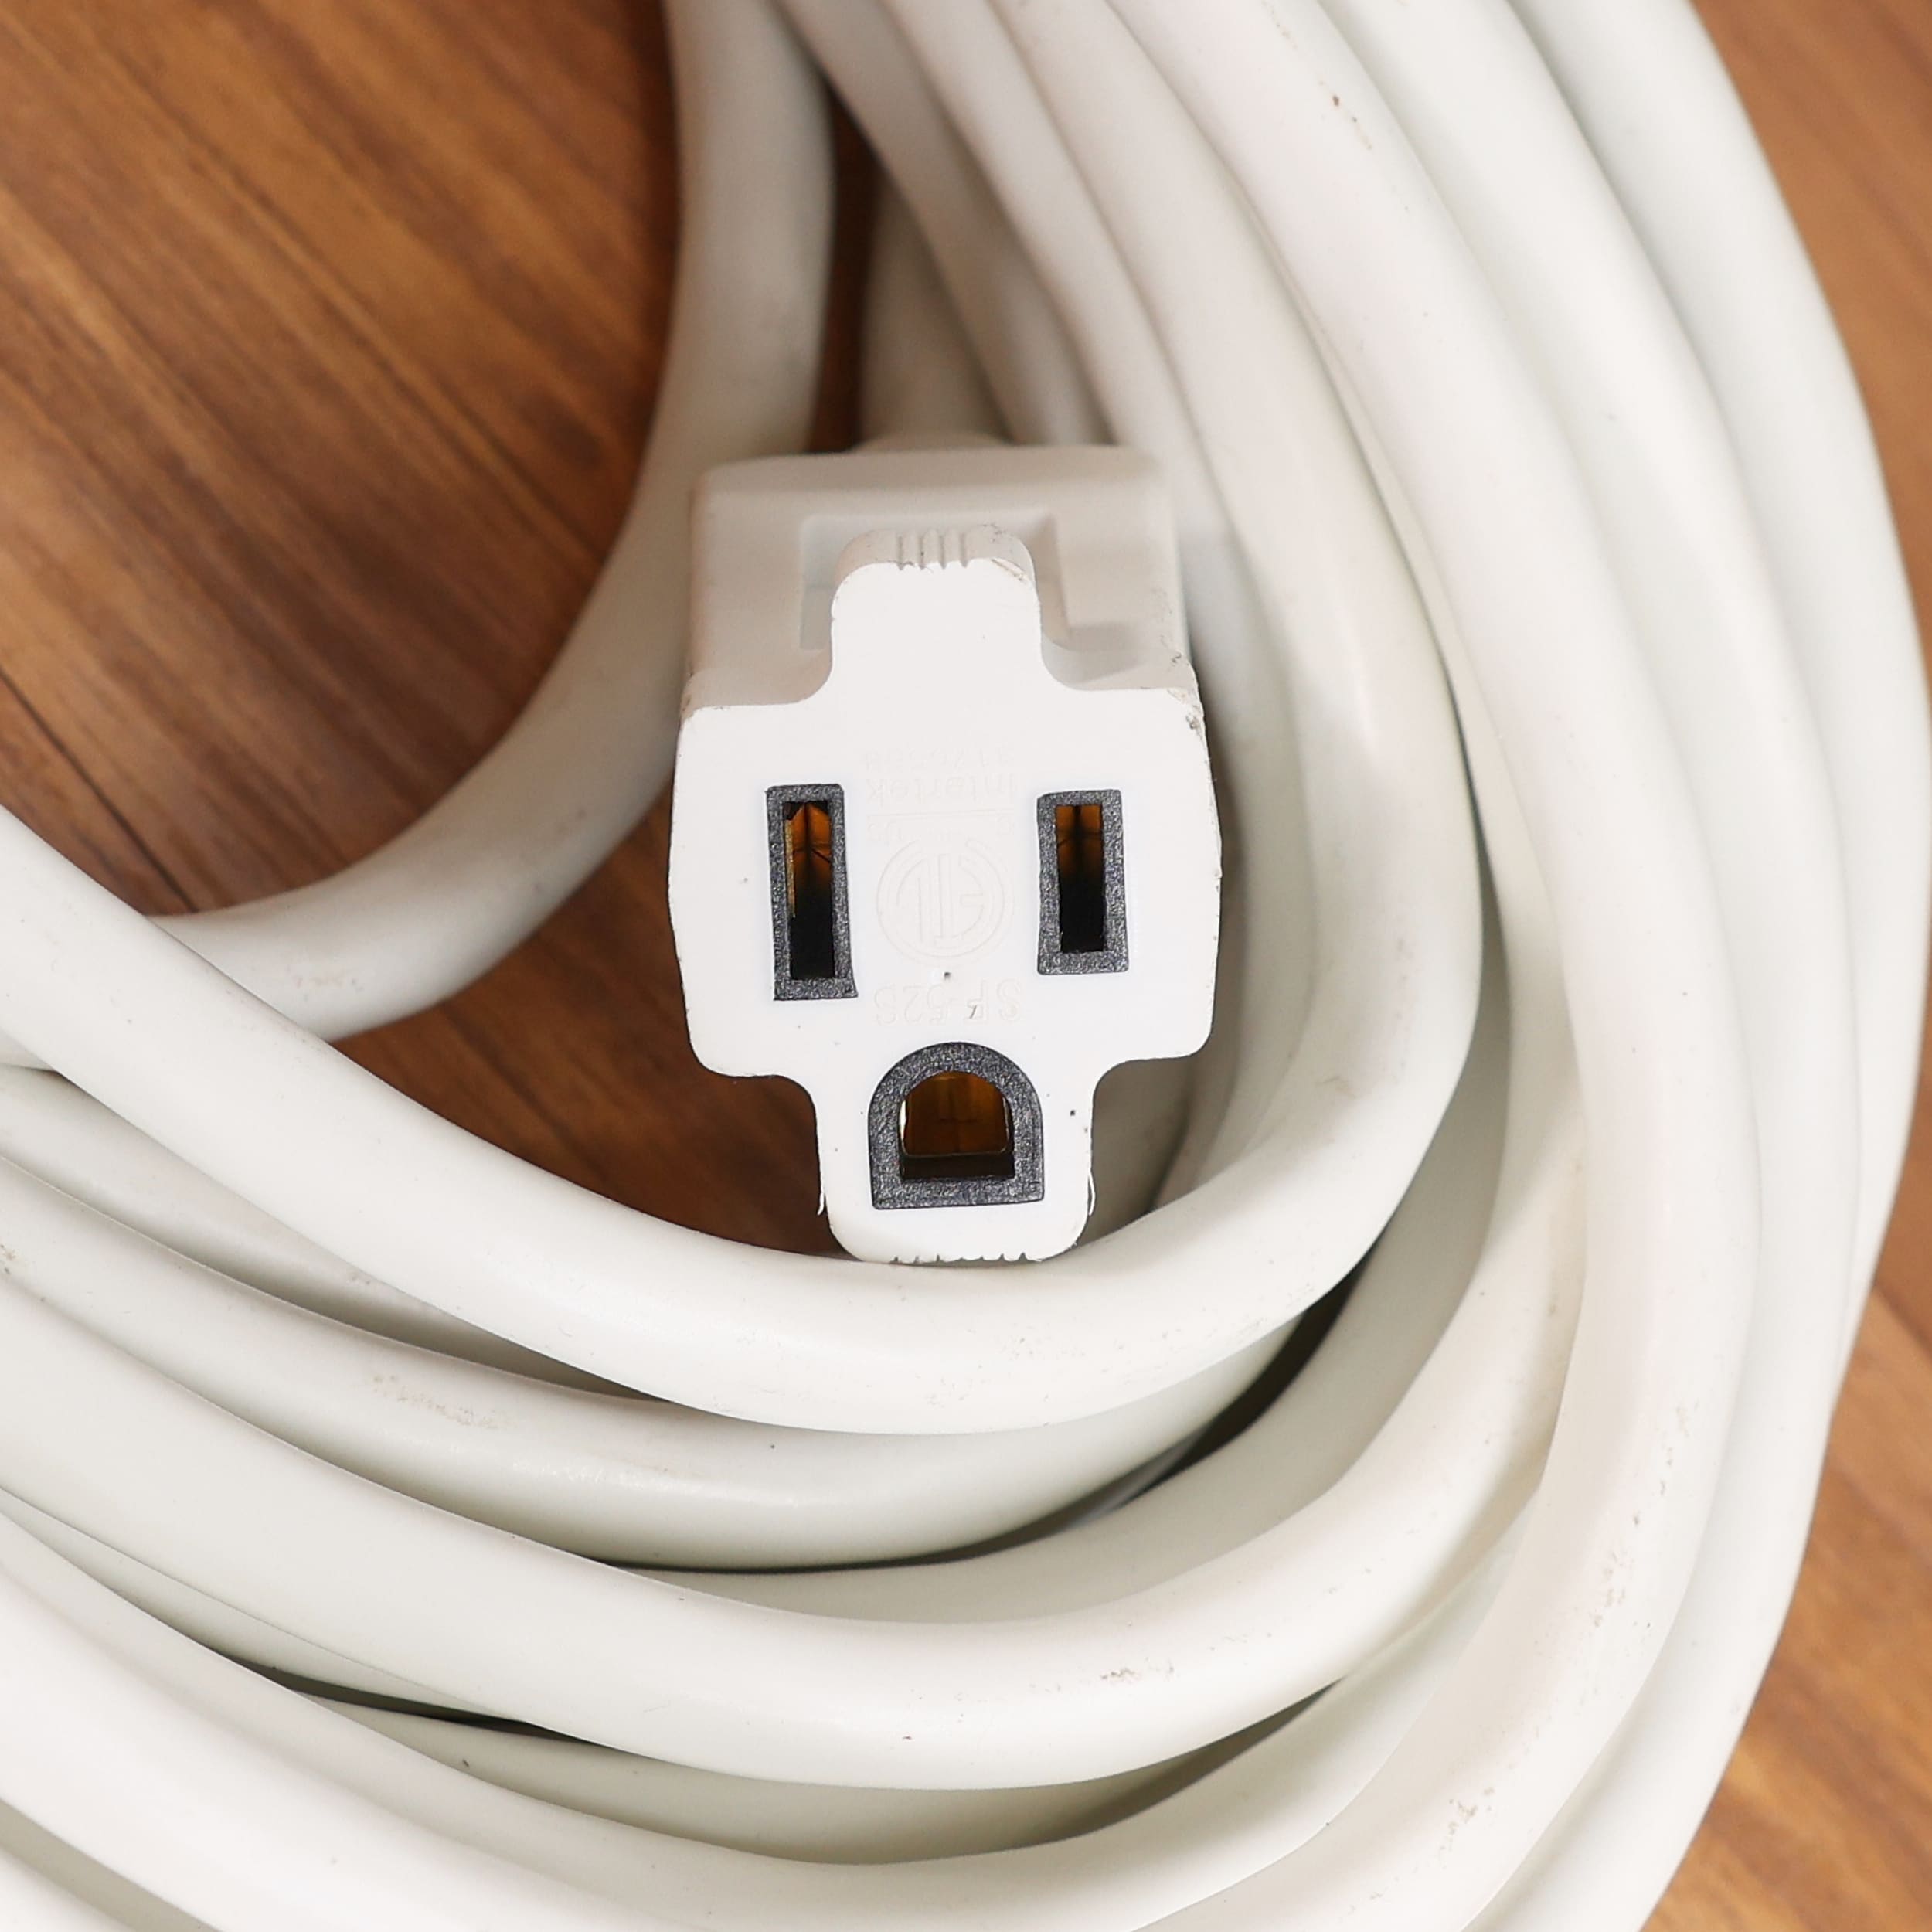 40 WHITE ELECTRIC CORD COVER